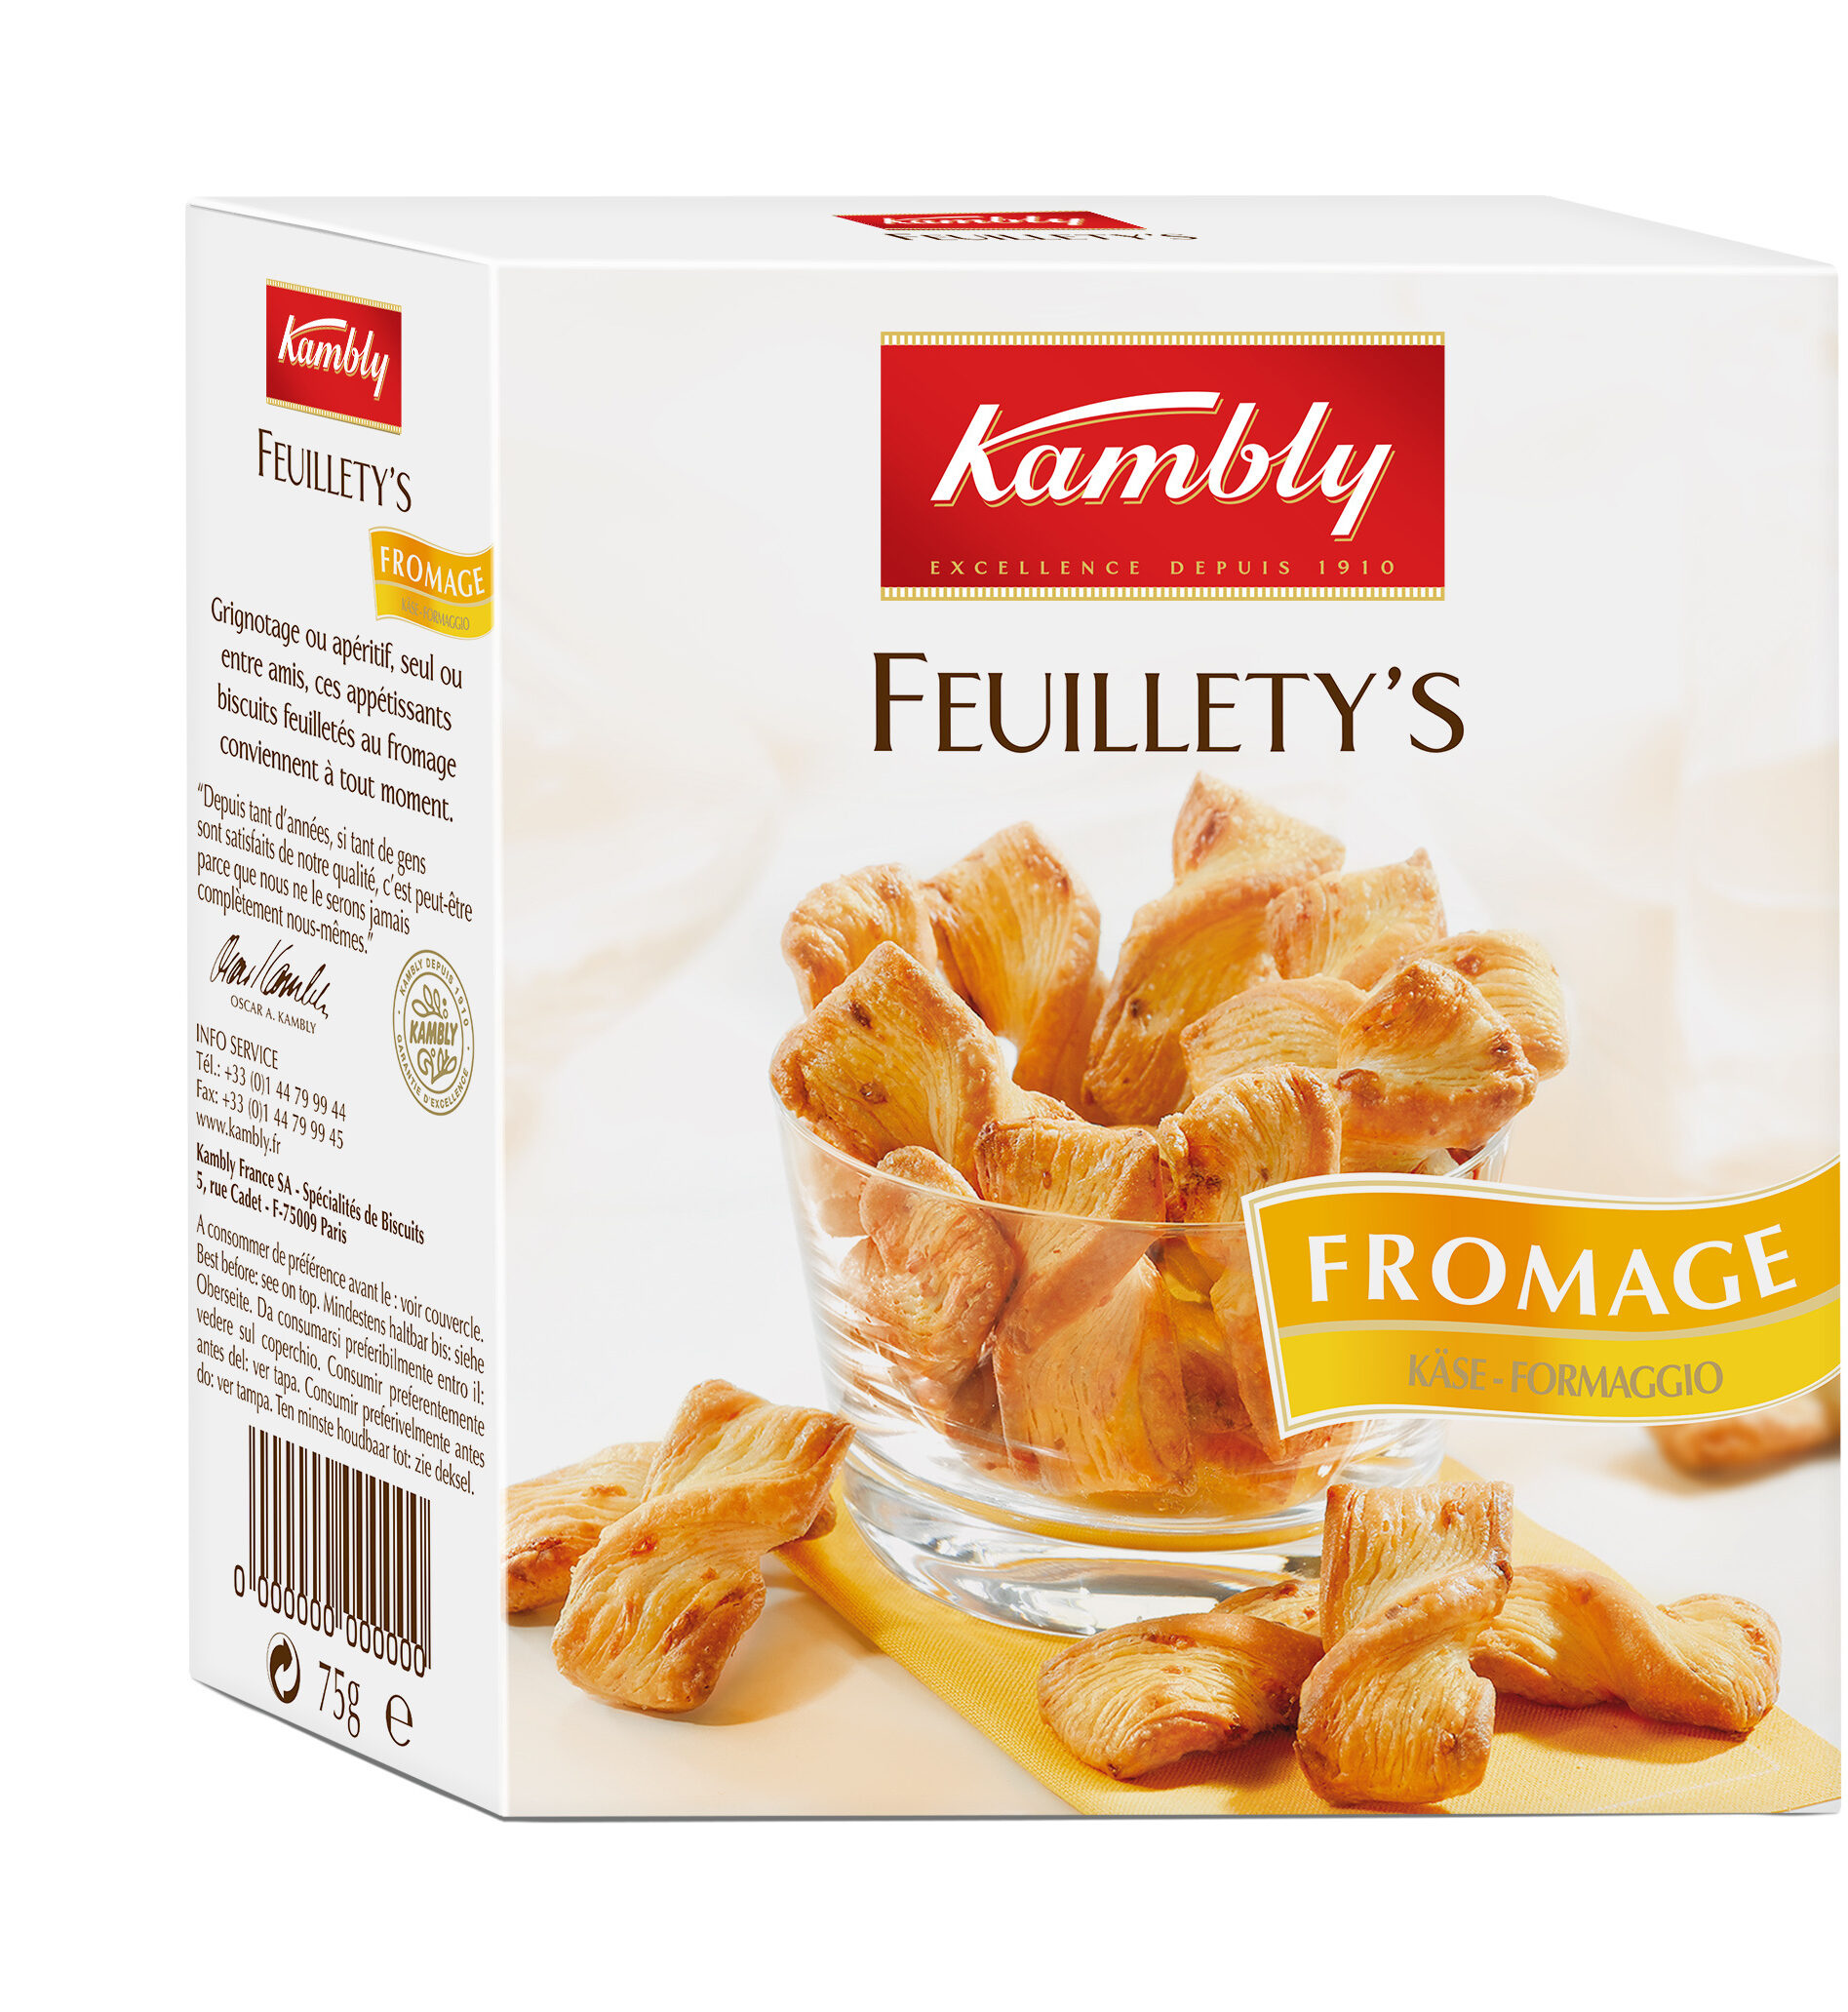 FEUILLETY'S FROMAGE 75G - KAMBLY - 75g - Produit